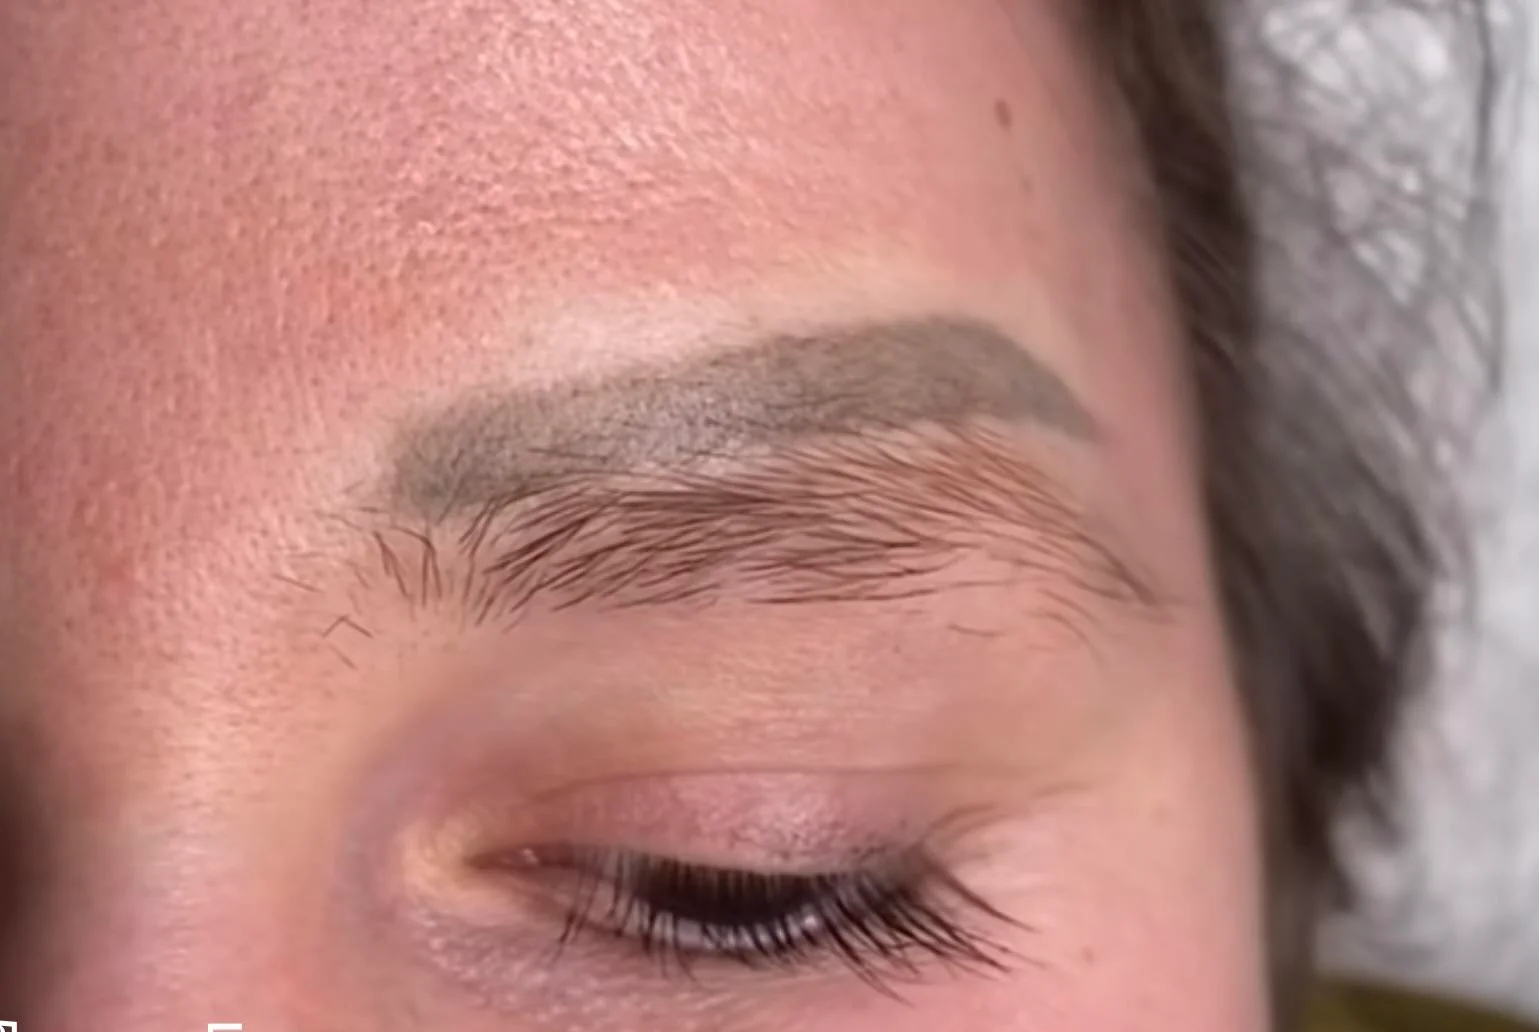 Eyebrow tattooed in the wrong place.